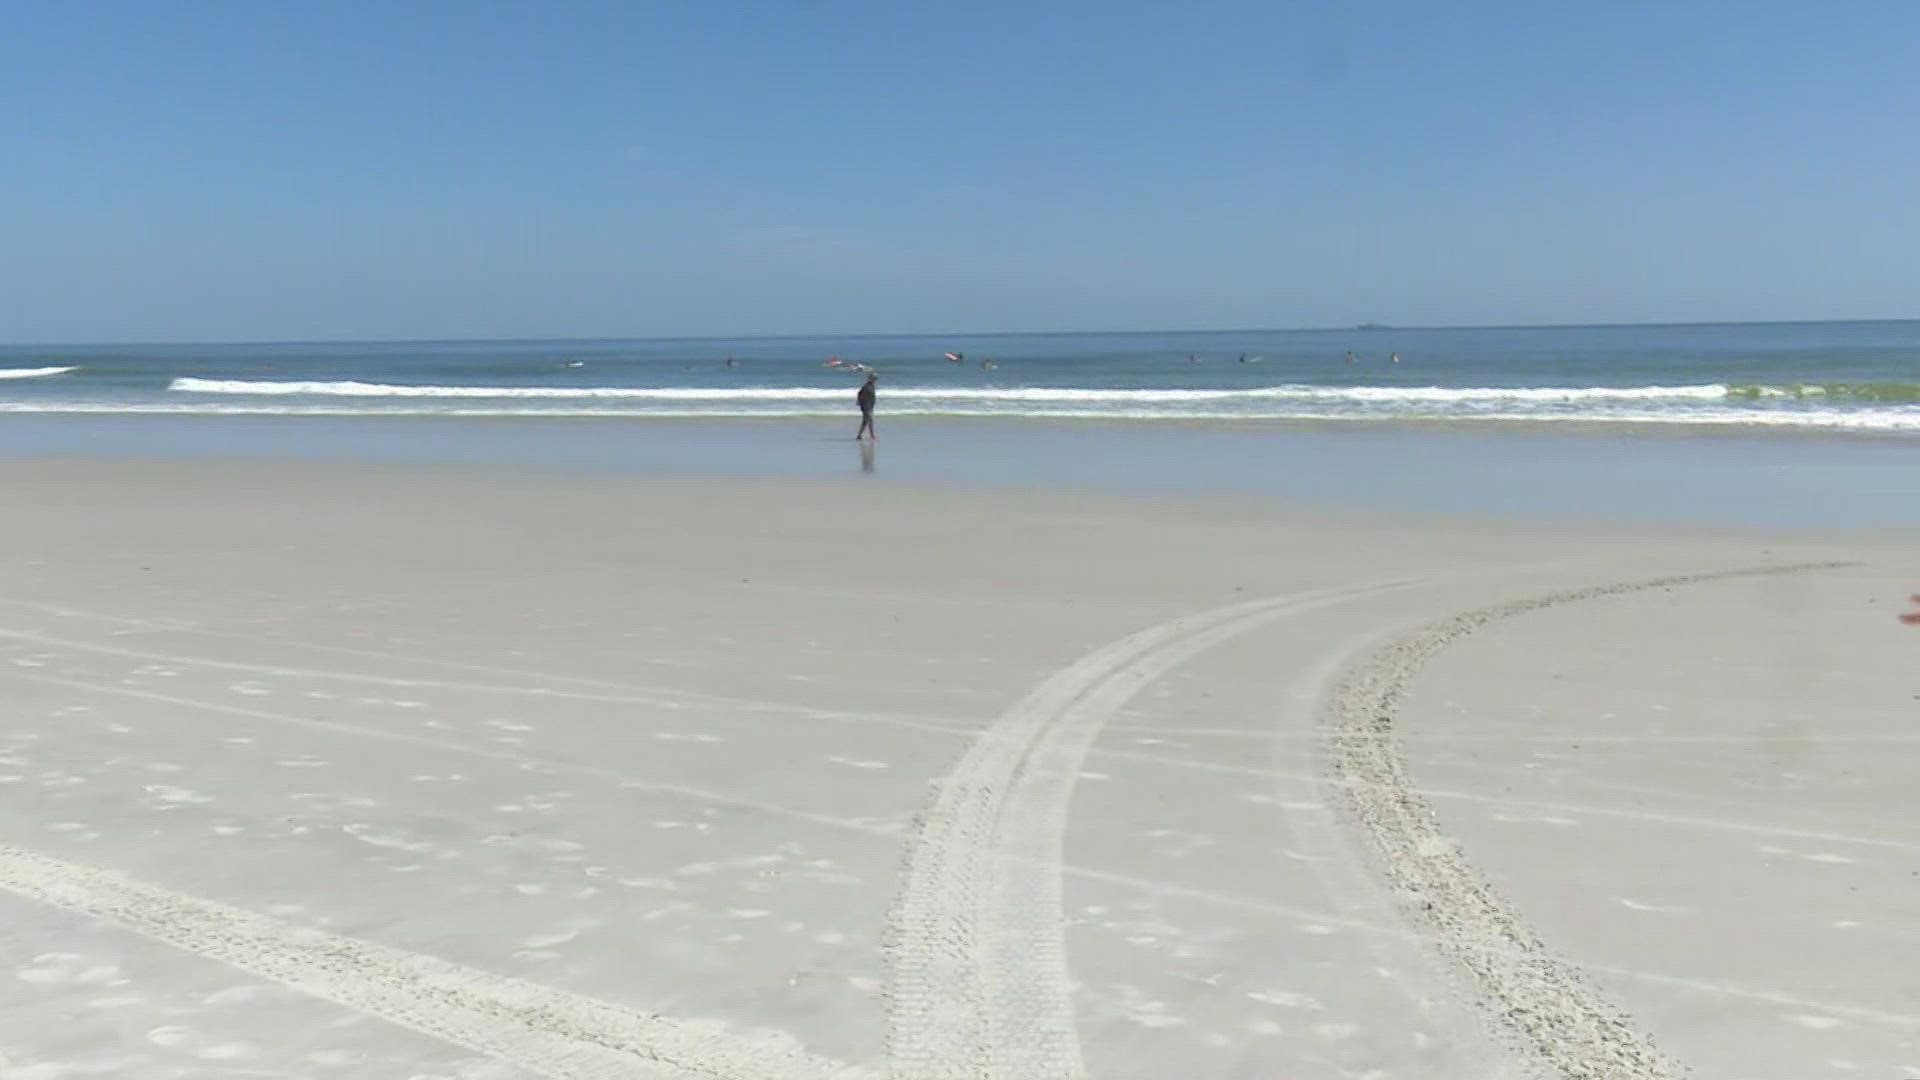 First Coast News is monitoring conditions at Jacksonville Beach after the storm surge from Hurricane Fiona caused dangerous conditions this weekend.